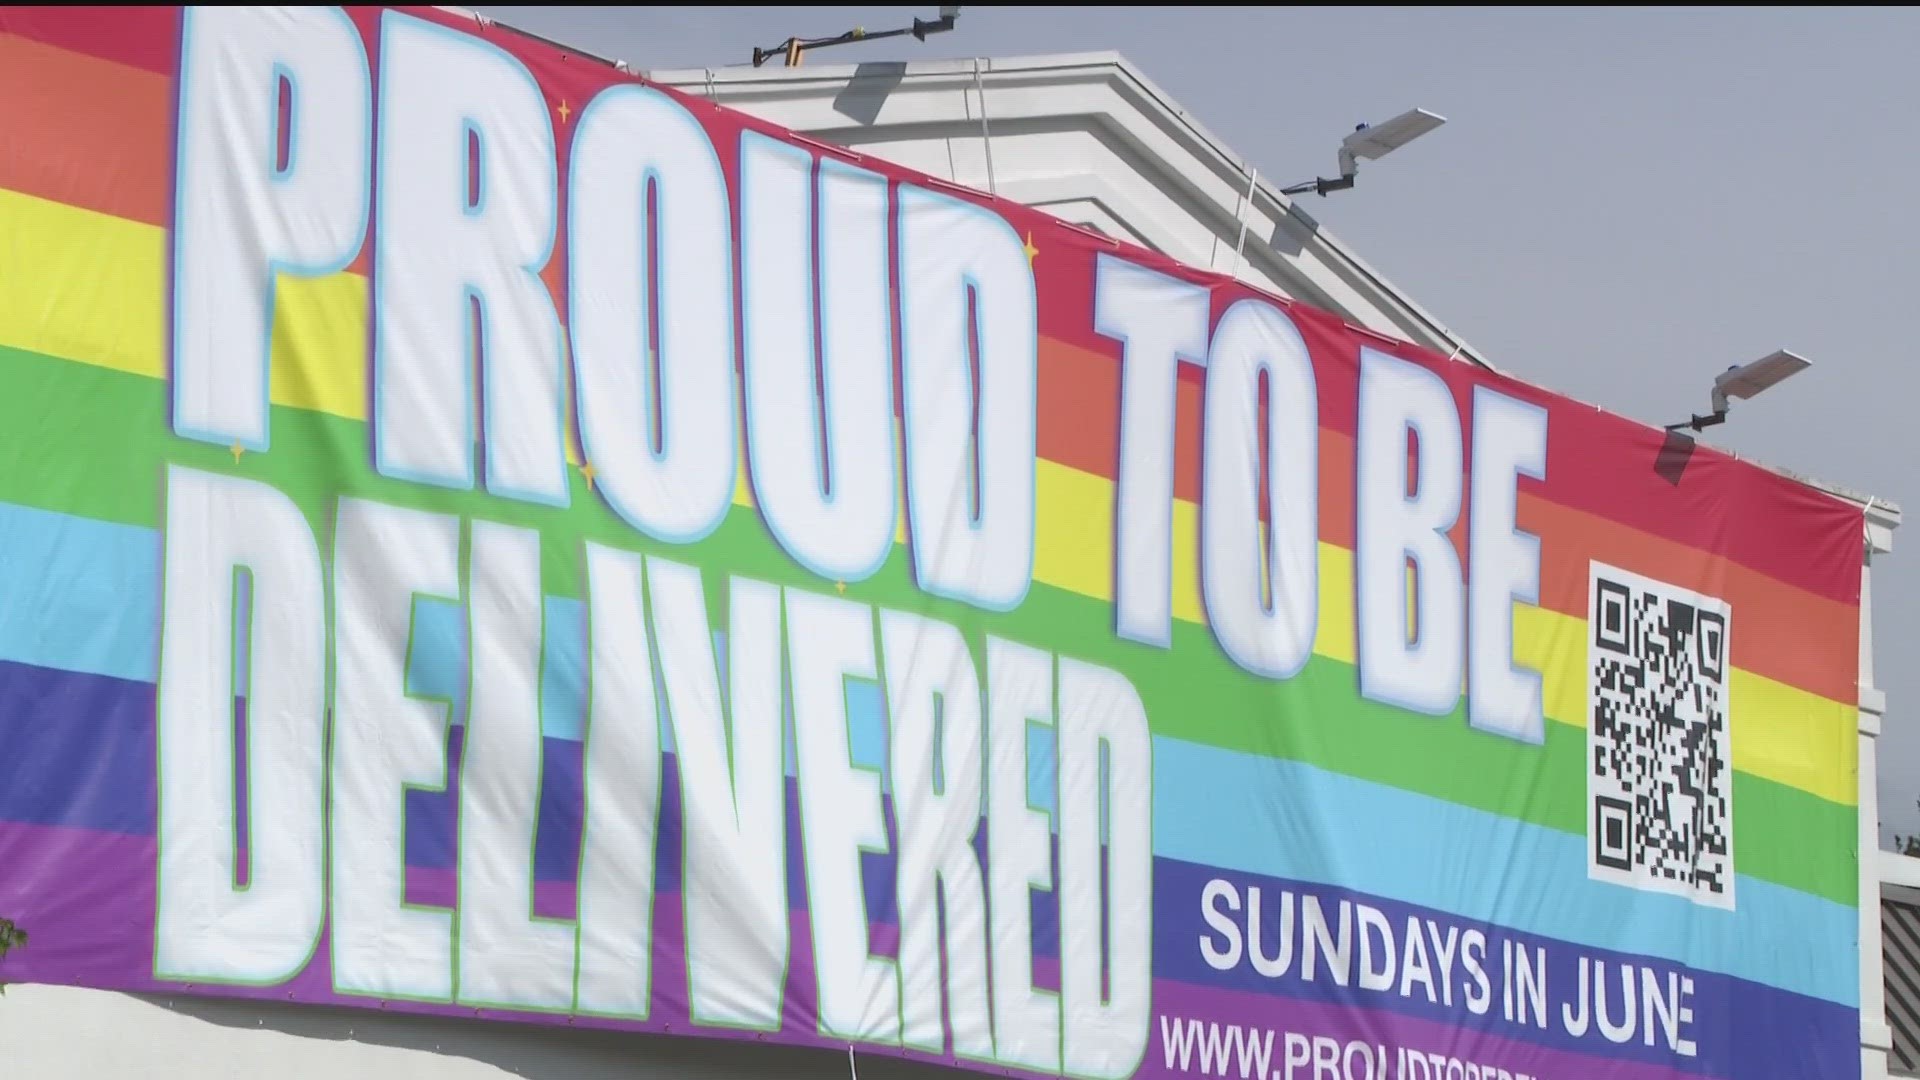 A local church’s rainbow-emblazoned signs have some raising questions – and concerns – during Pride month.